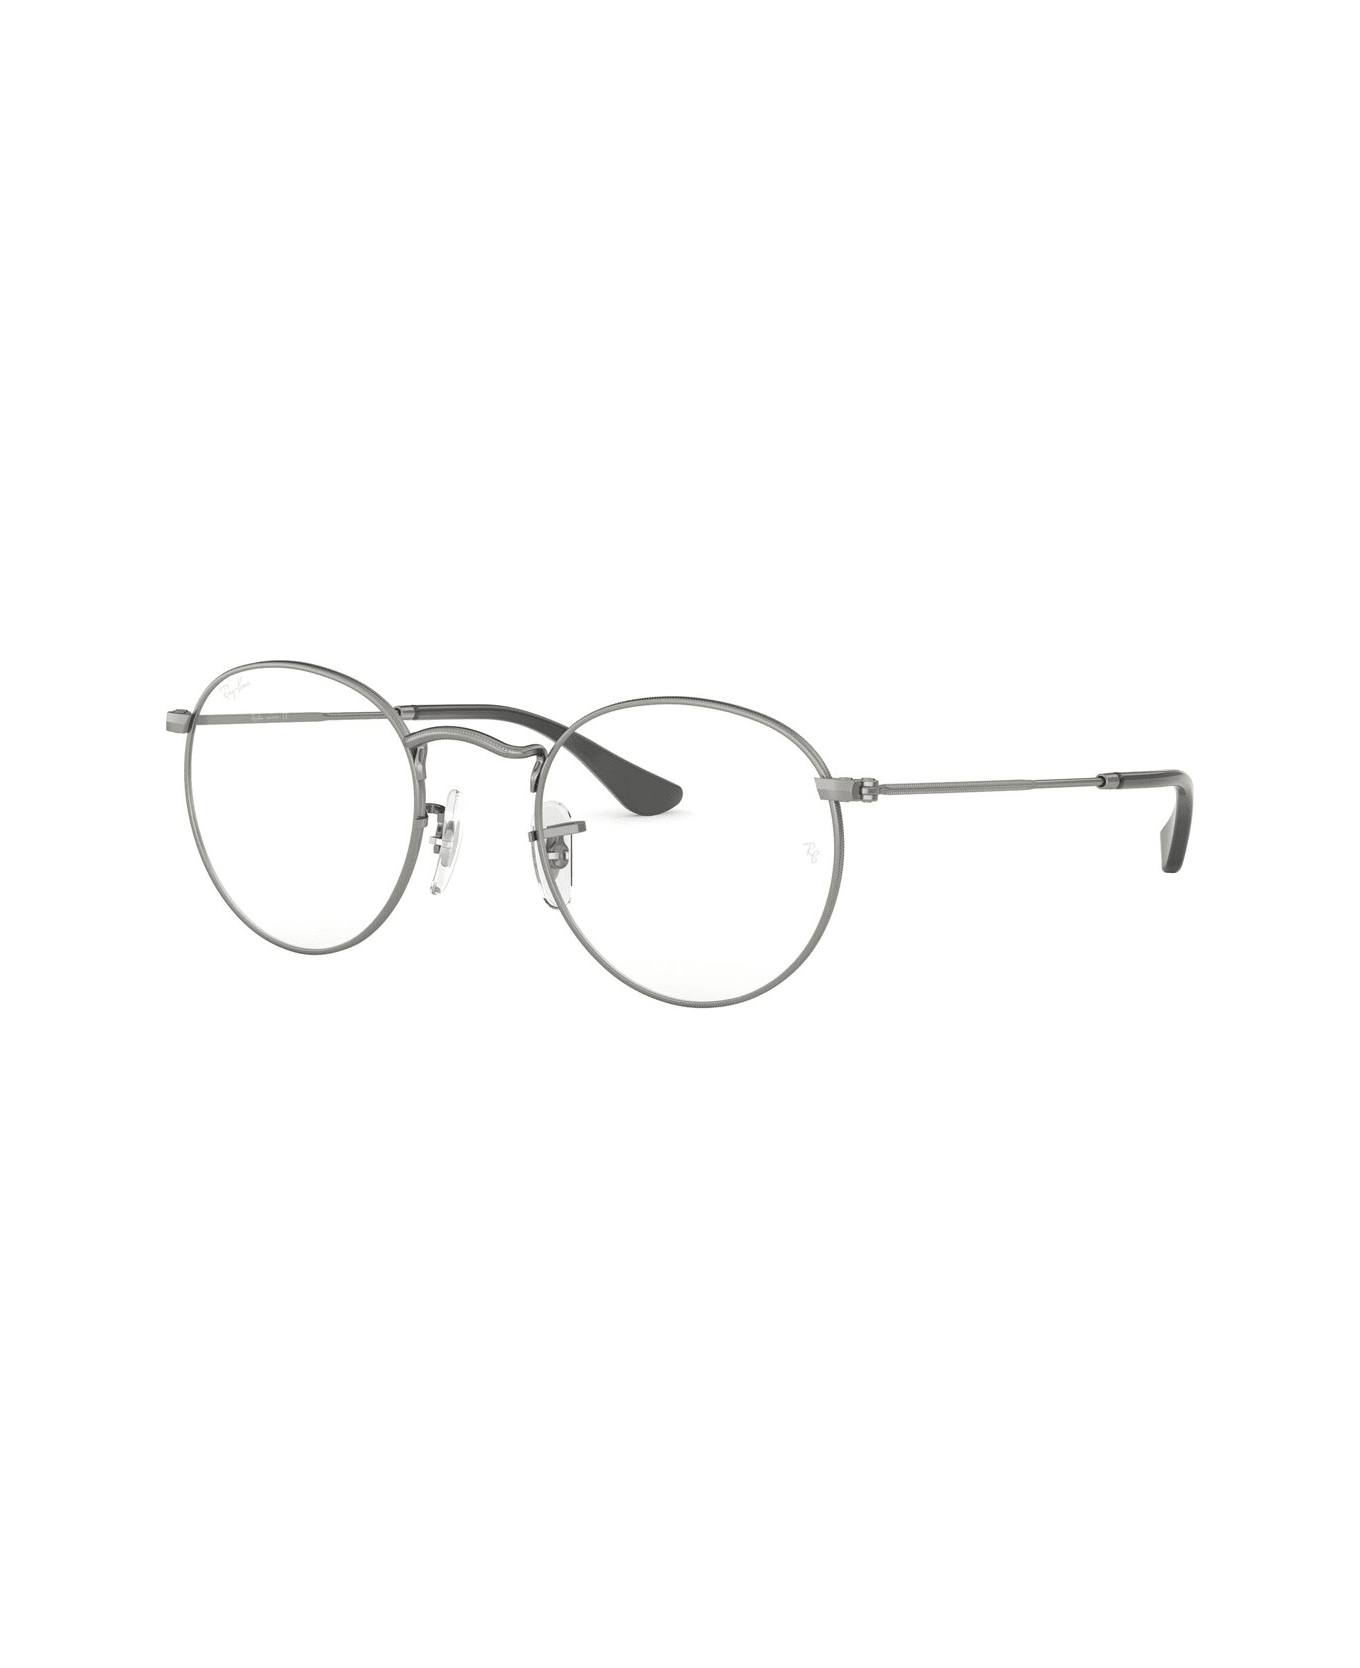 Ray-Ban Round Metal Rx 3447v Glasses - Argento